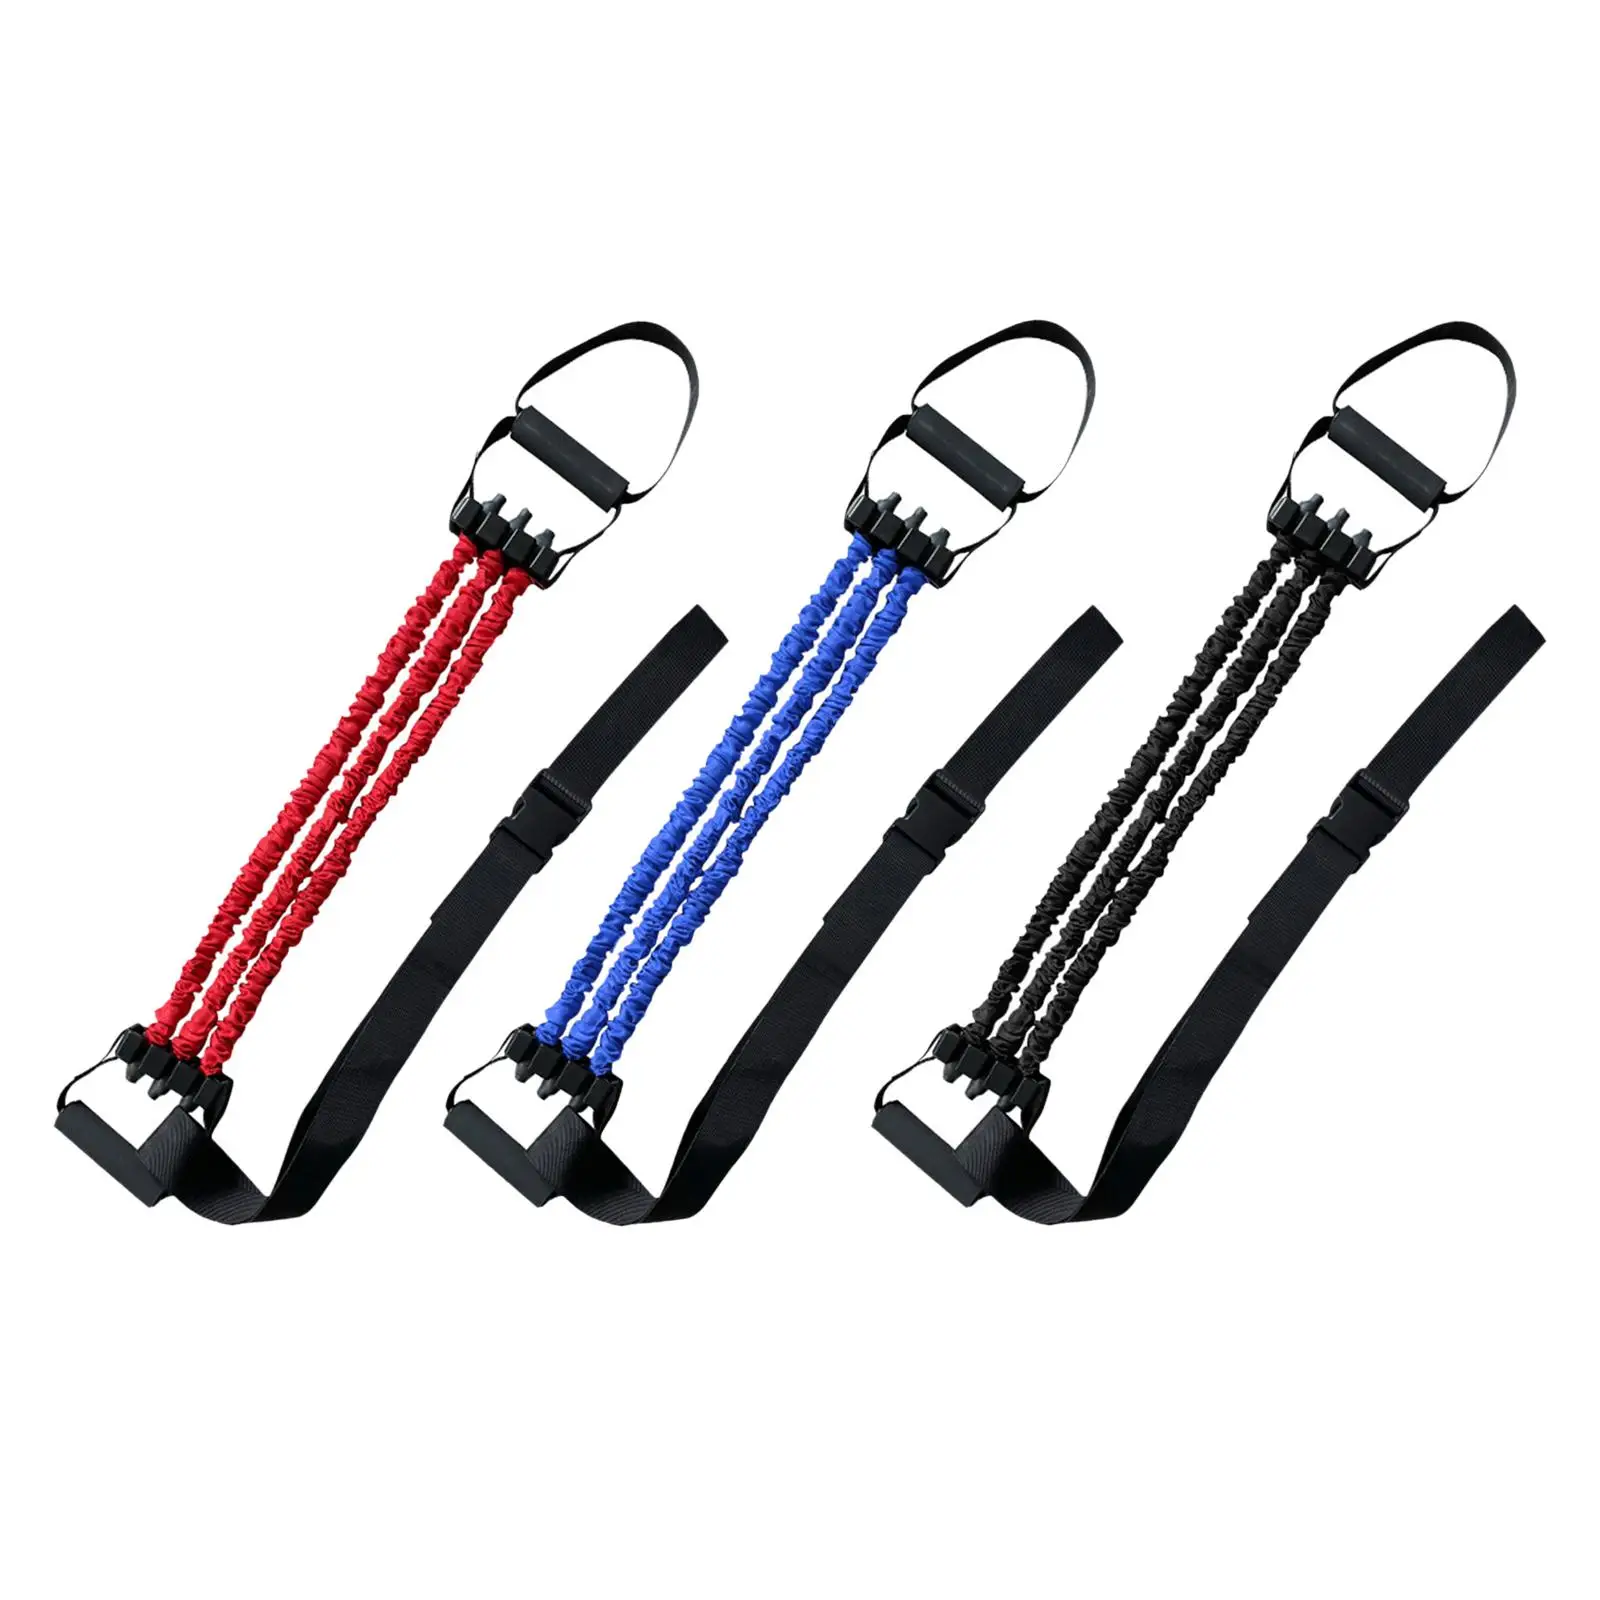 Heavy Duty Chin up Assist Bands Resistance Bands for Improve Arm Strength